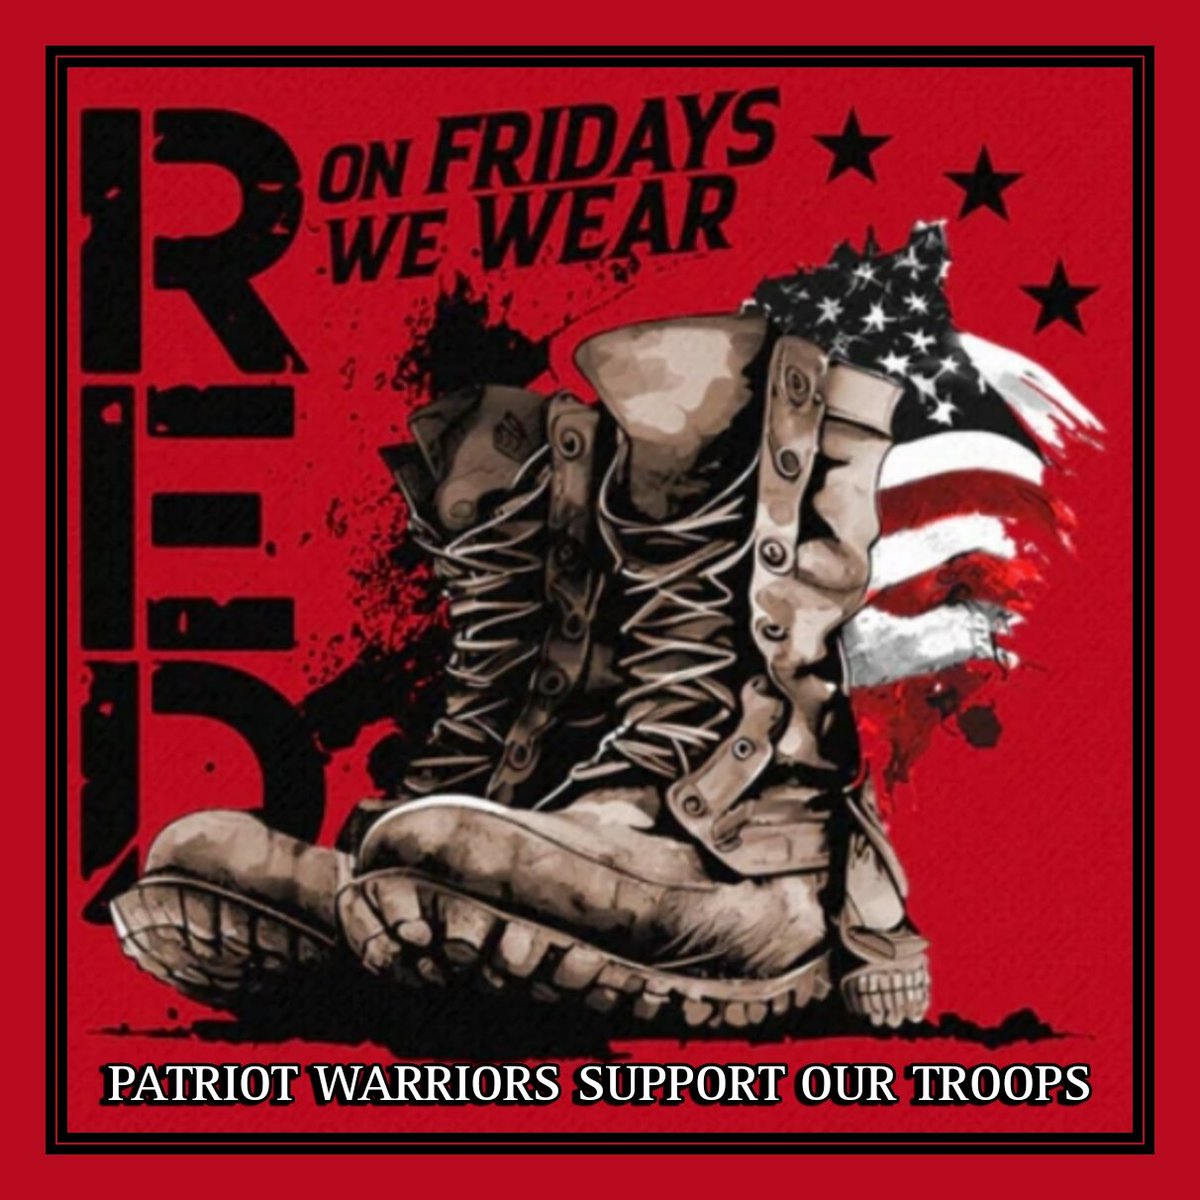 Good morning Fellow Patriots.☕️🙏🇺🇲 Today is not just any Friday, it's a SPECIAL Red Friday! 🇺🇸🇺🇸🇺🇸 Why, you ask? Because it's the start of Memorial Day Weekend! 🎉🎉🎉 Let's take a moment to honor and remember the brave men and women who have made the ultimate sacrifice for our